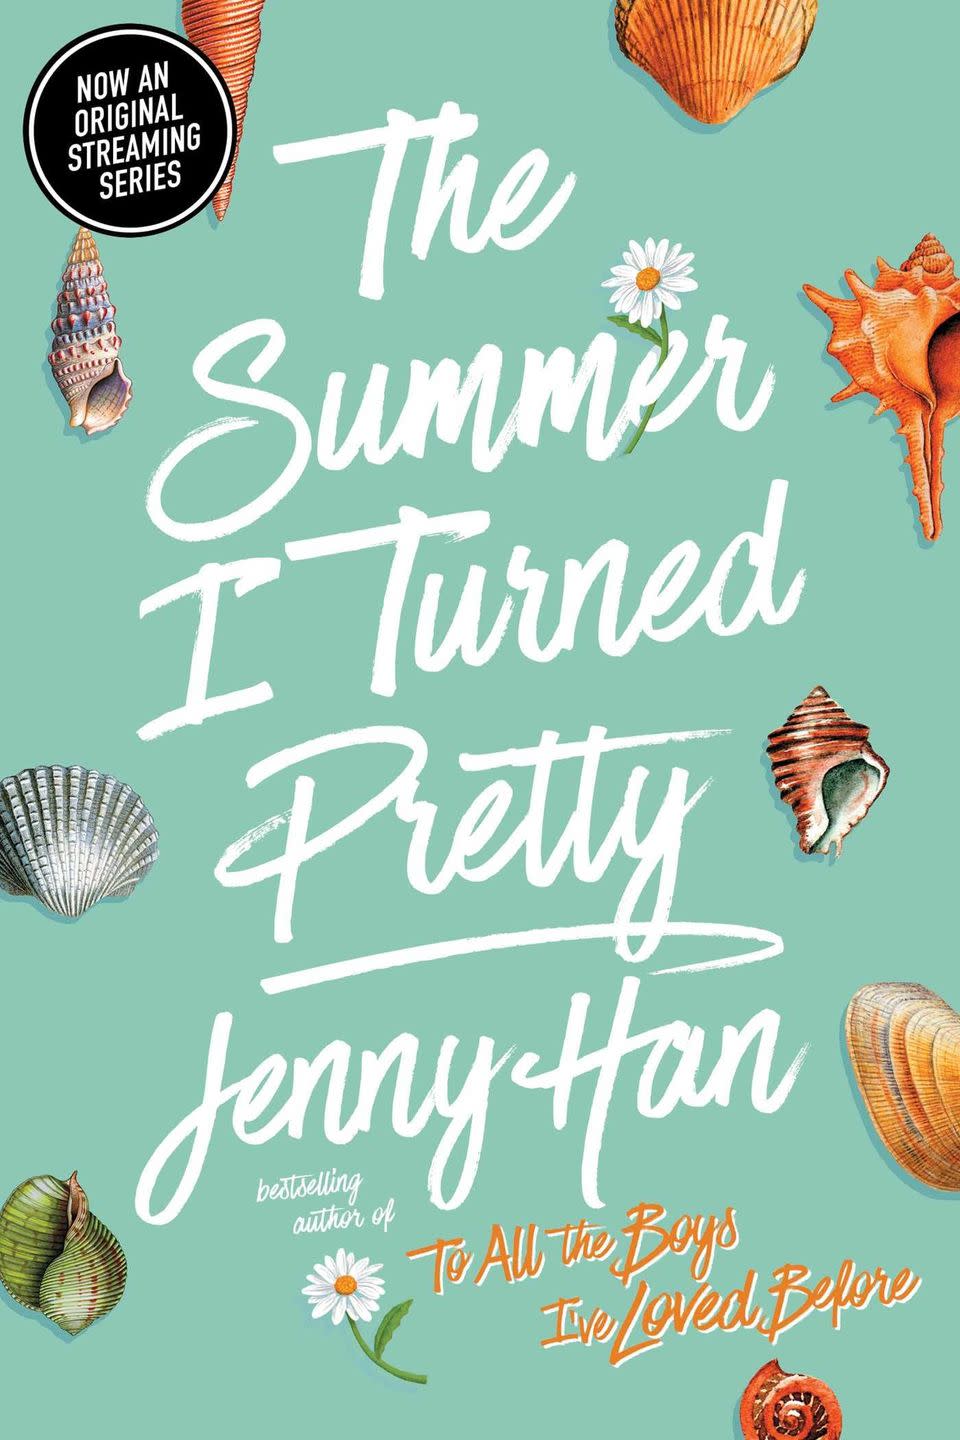 41) “The Summer I Turned Pretty” Trilogy by Jenny Han